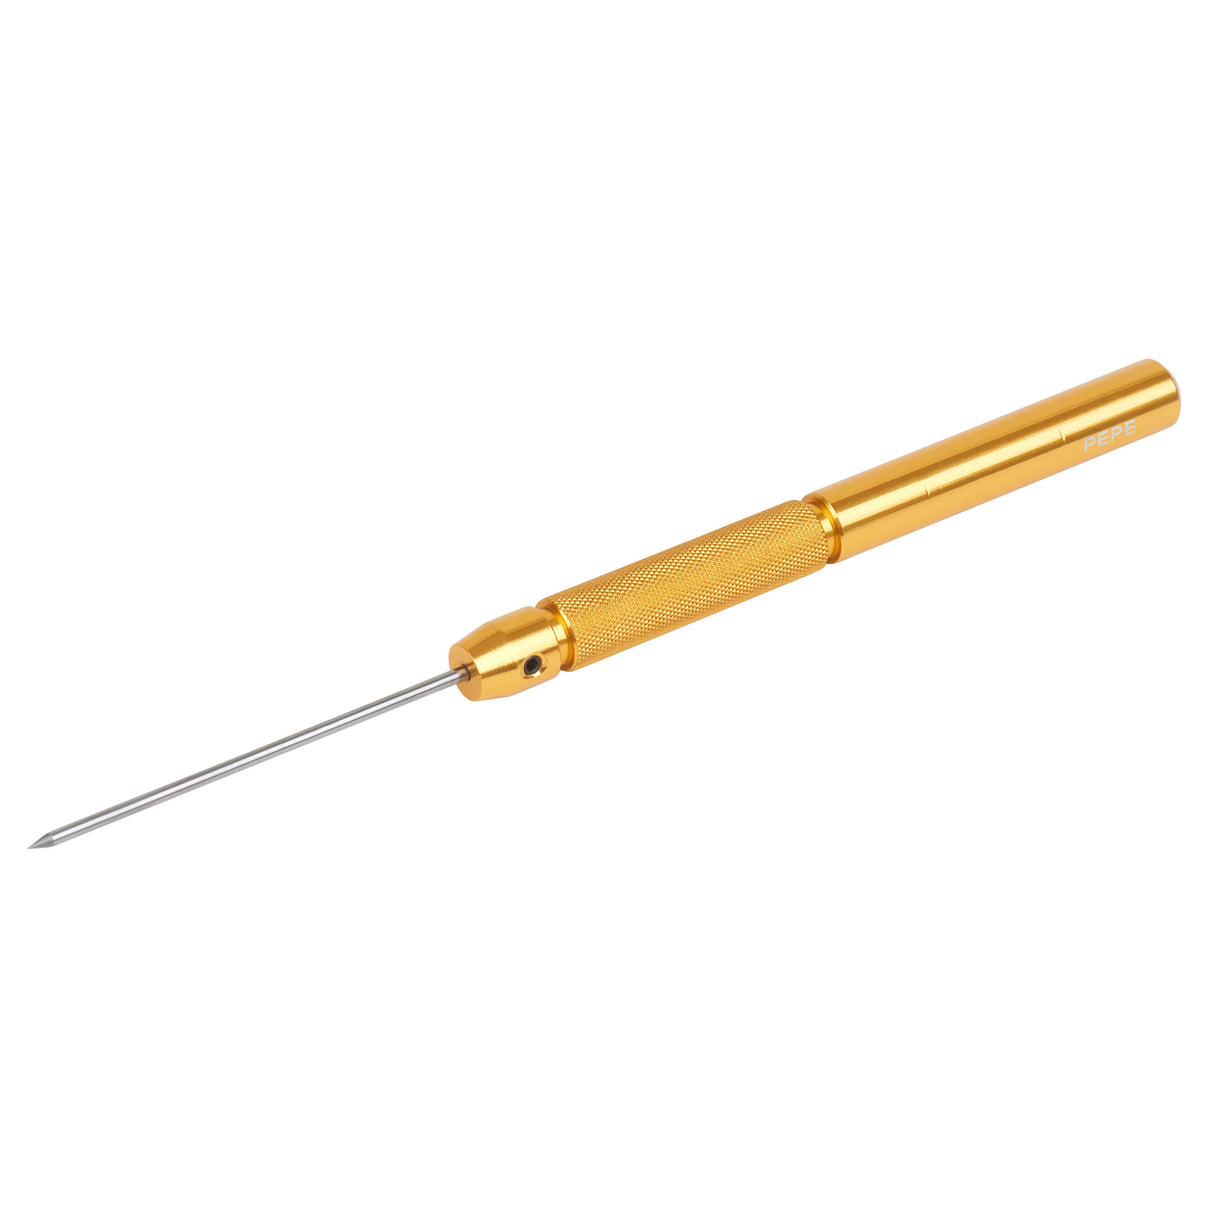 Carbide Soldering Pick with "StayCool" Aluminum Handle-Pepetools